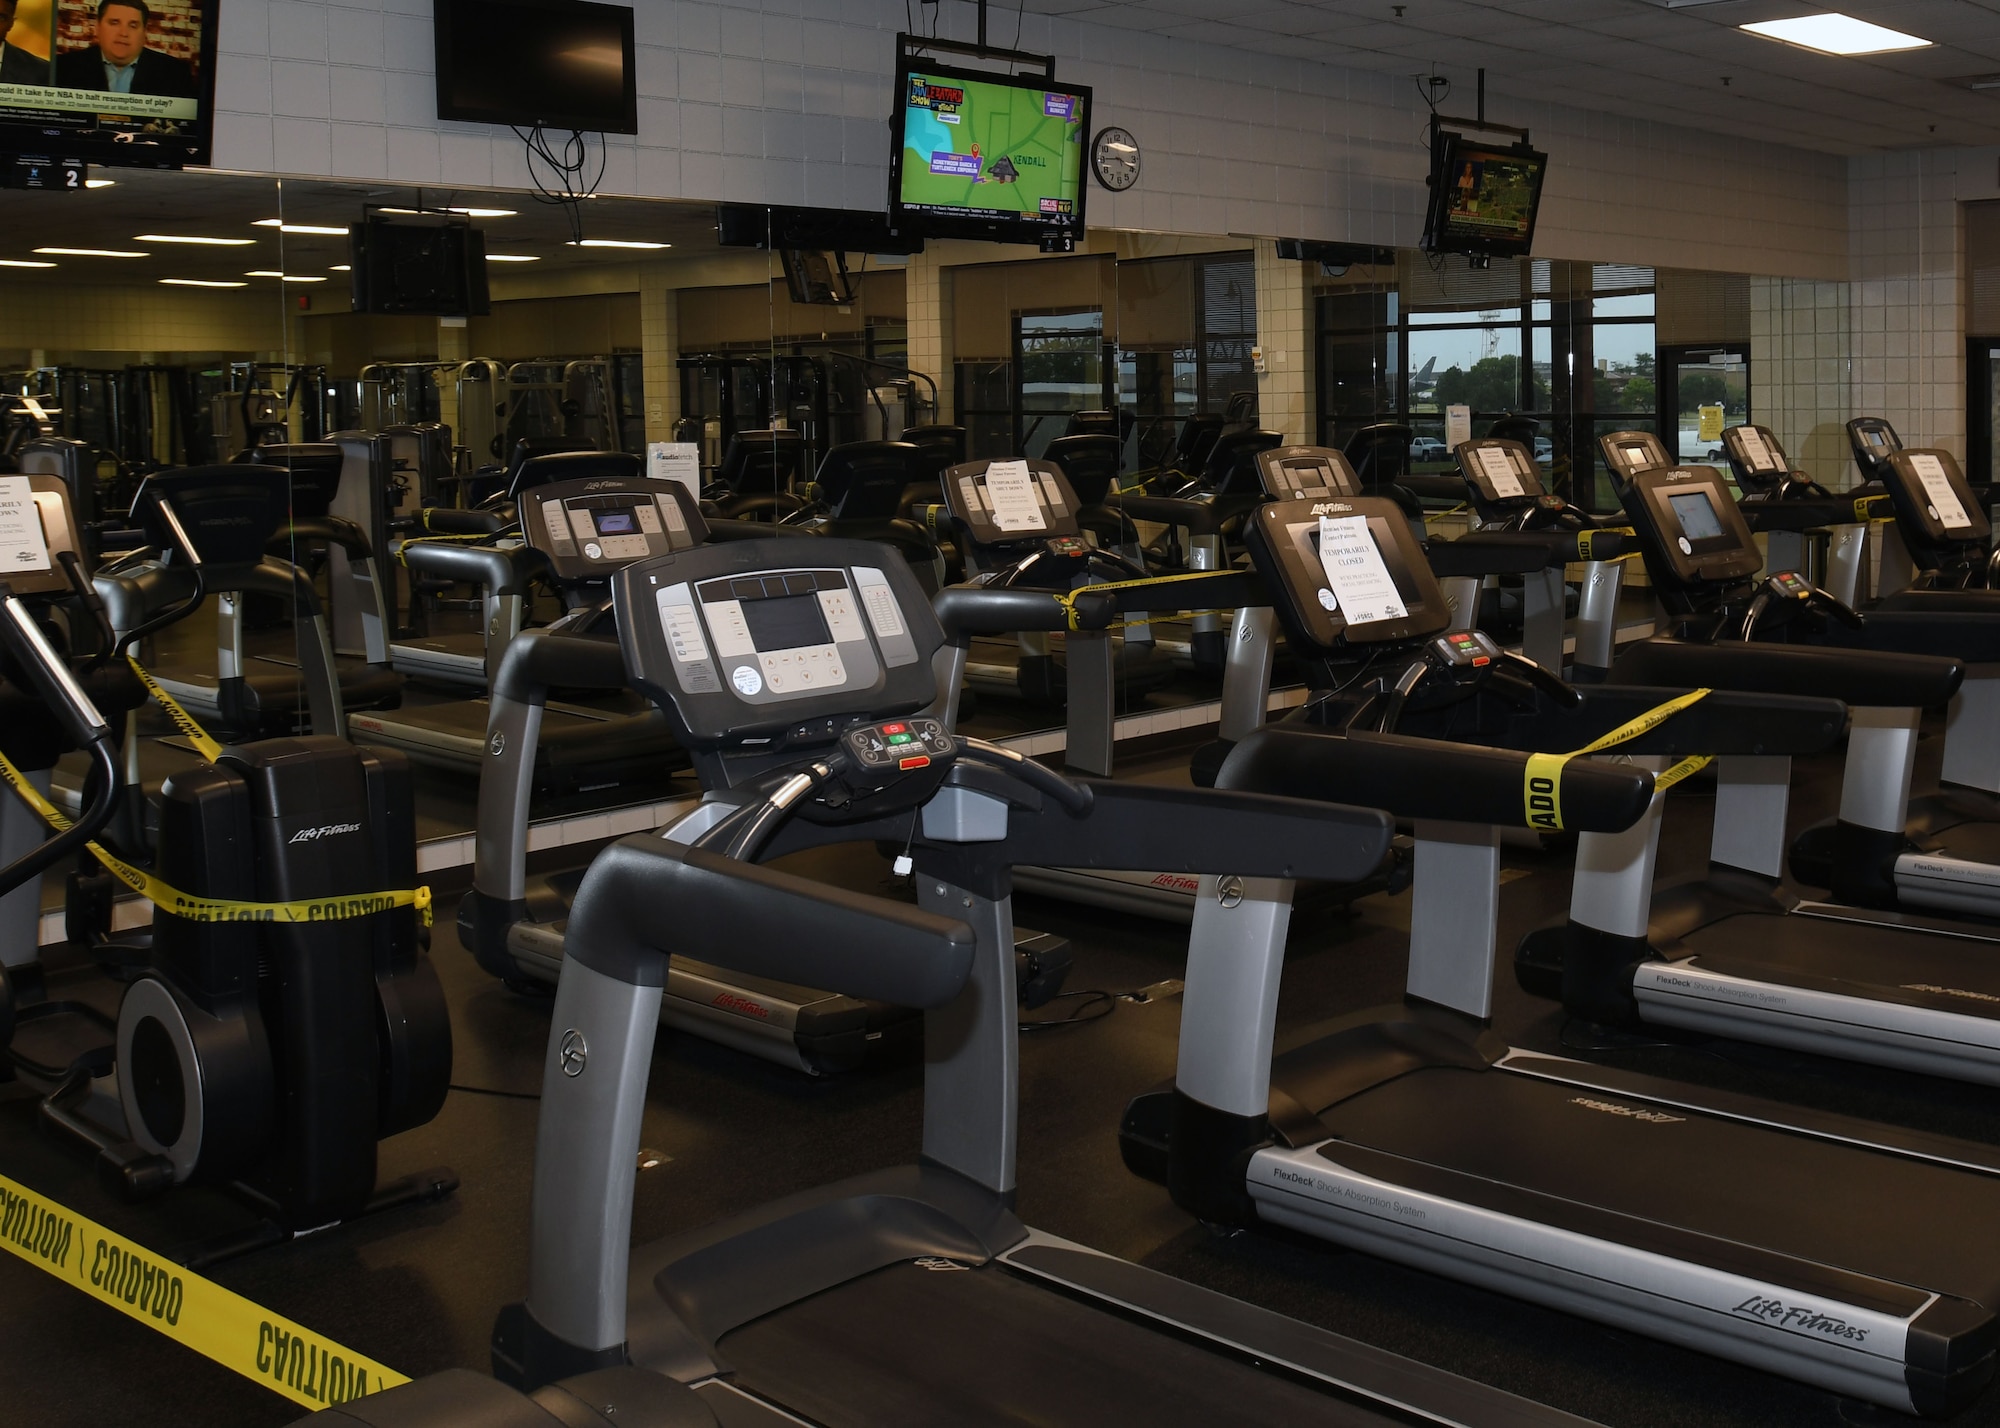 Caution tape drapes over gym equipment to help customers follow social distancing guidelines June 19, 2020, at McConnell Air Force Base, Kansas. The facility opened with a few noticeable changes that allow Airmen to bring an element of fitness into their daily routines. (U.S. Air Force photo by Tech. Sgt. Jennifer Stai)